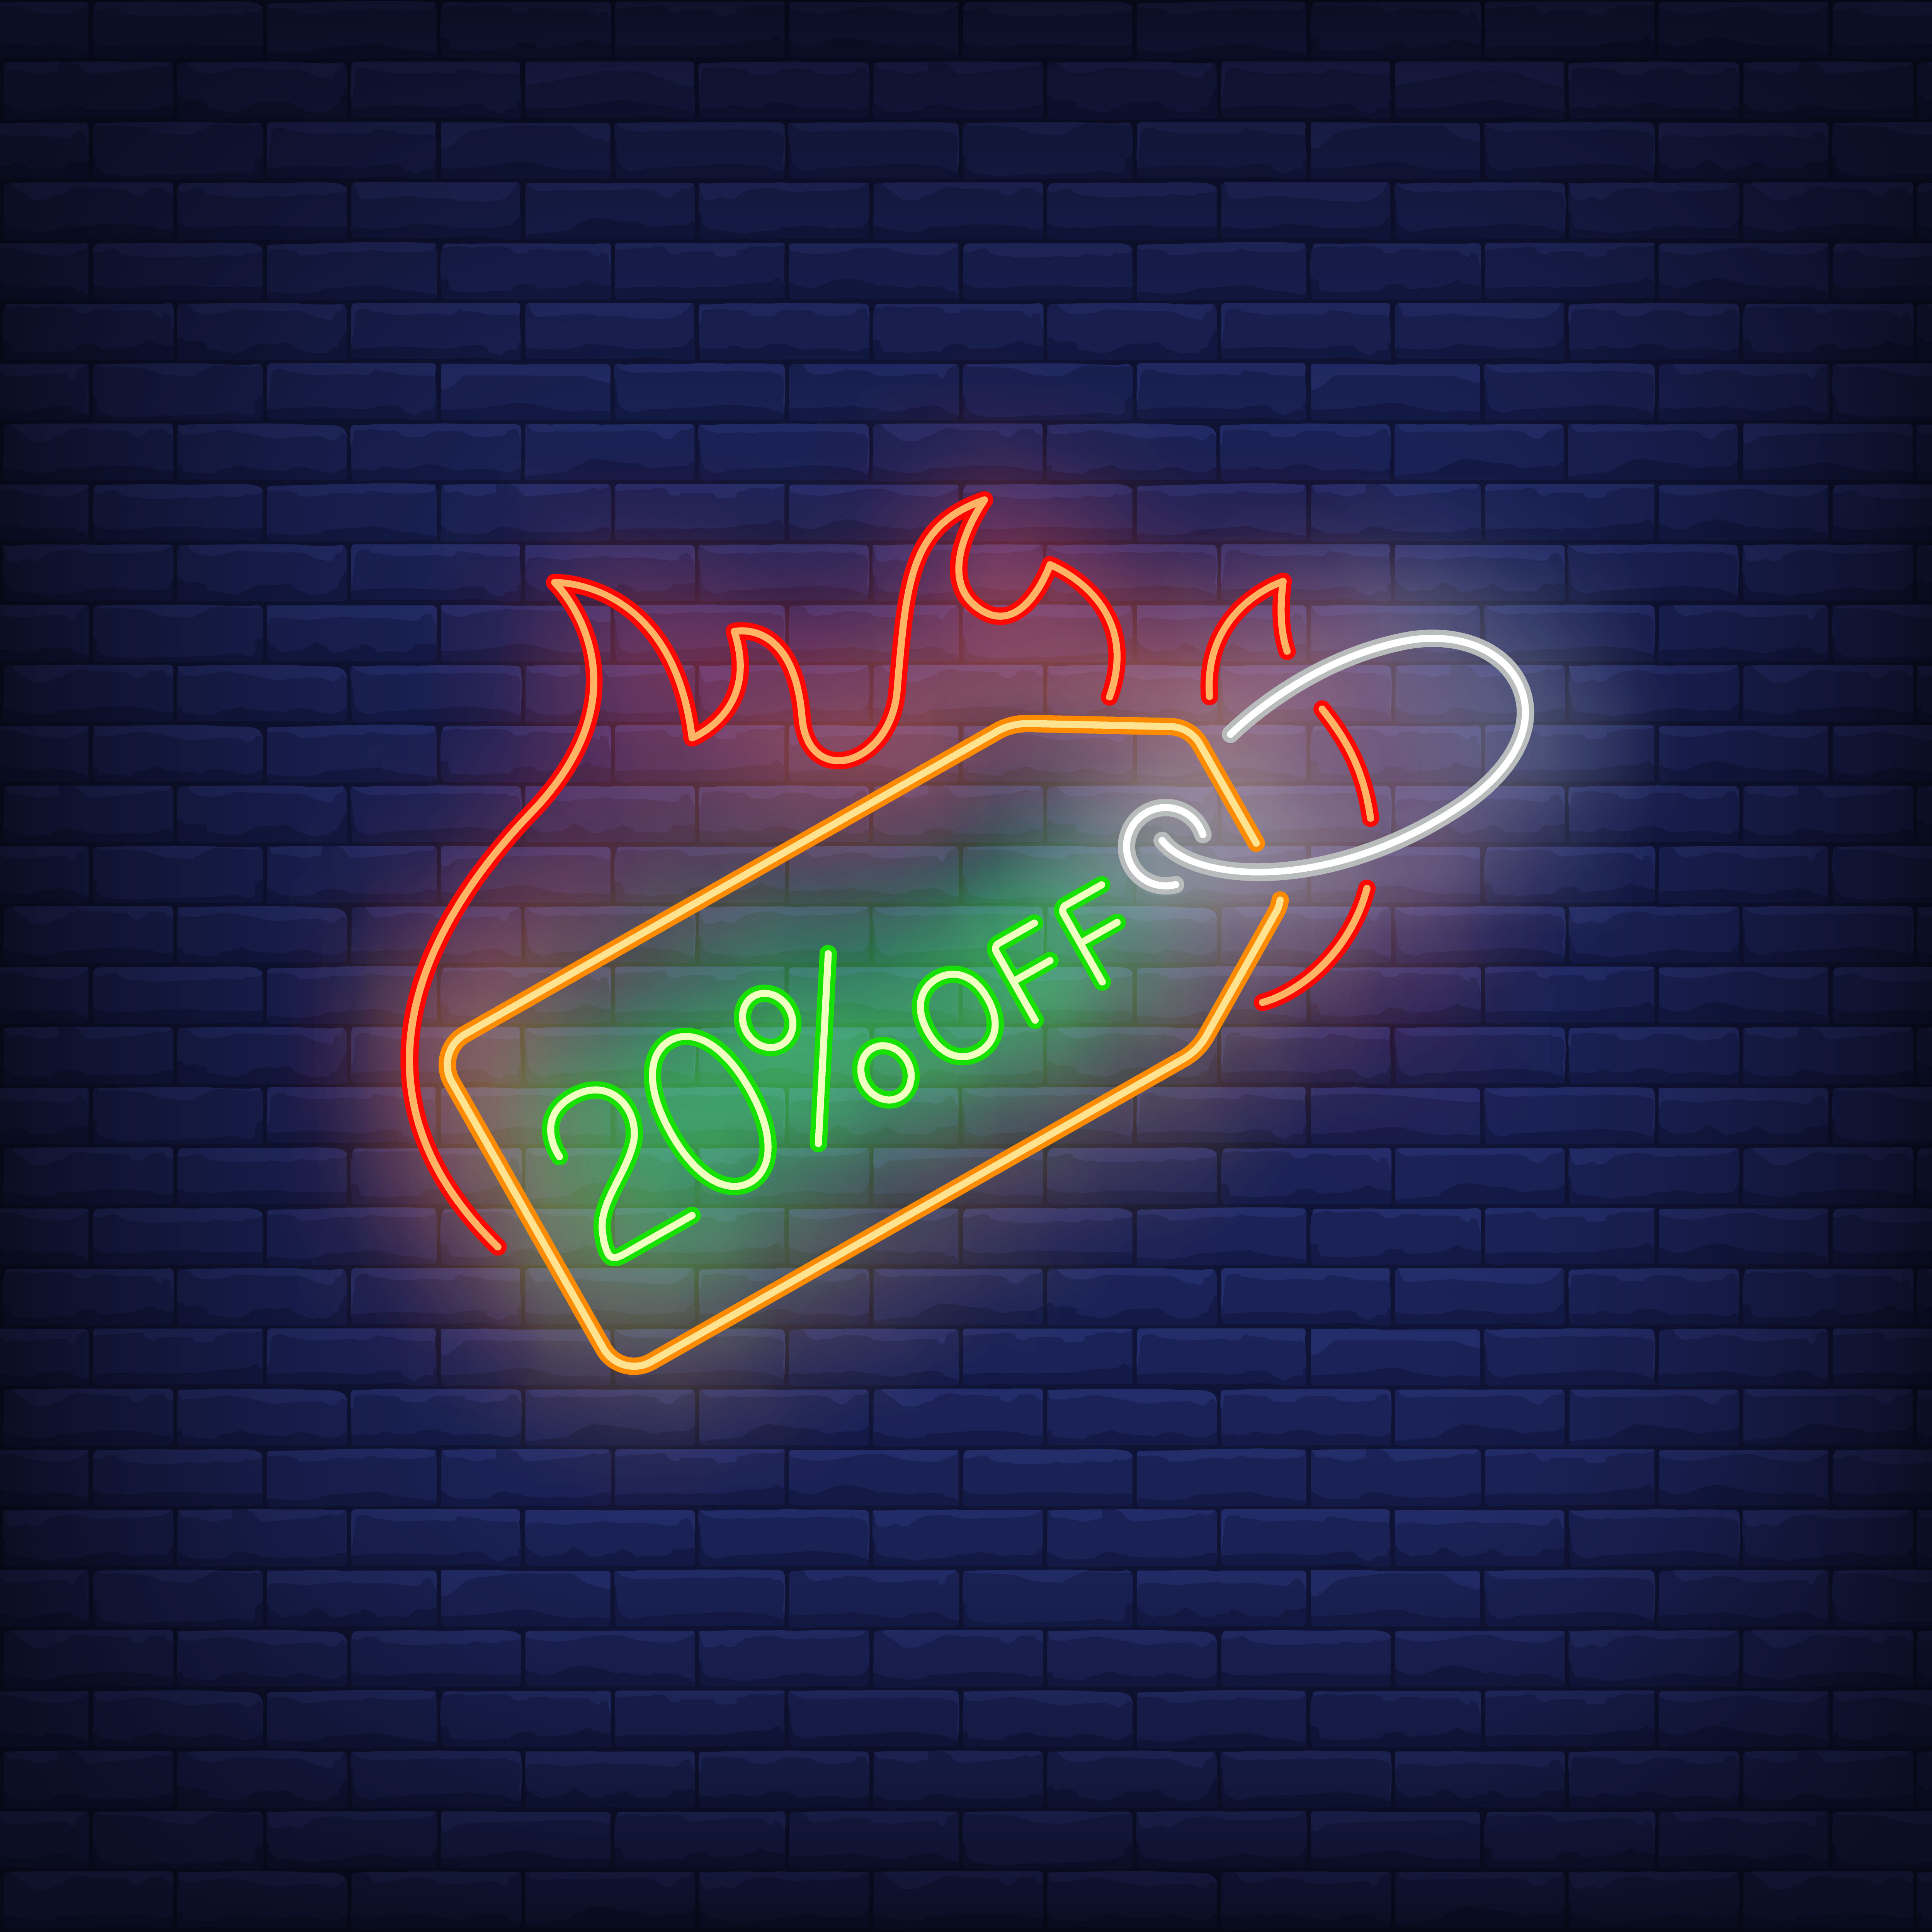 20 percent discount label on fire neon sign